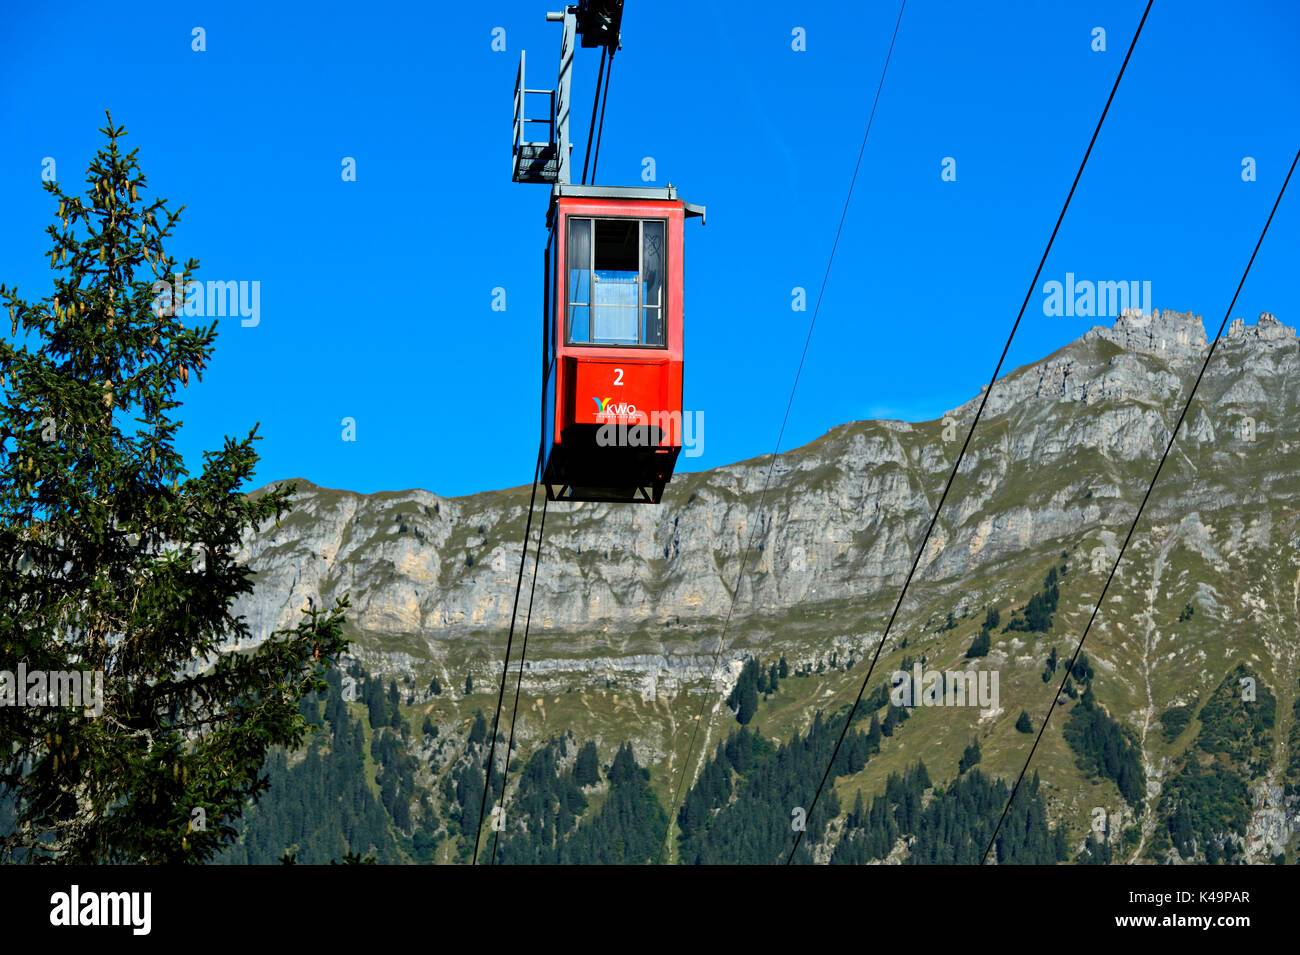 Cabin Of The Trift Aerial Cable Car, Gadmen, Haslital Region, Canton Of Bern, Switzerland Stock Photo